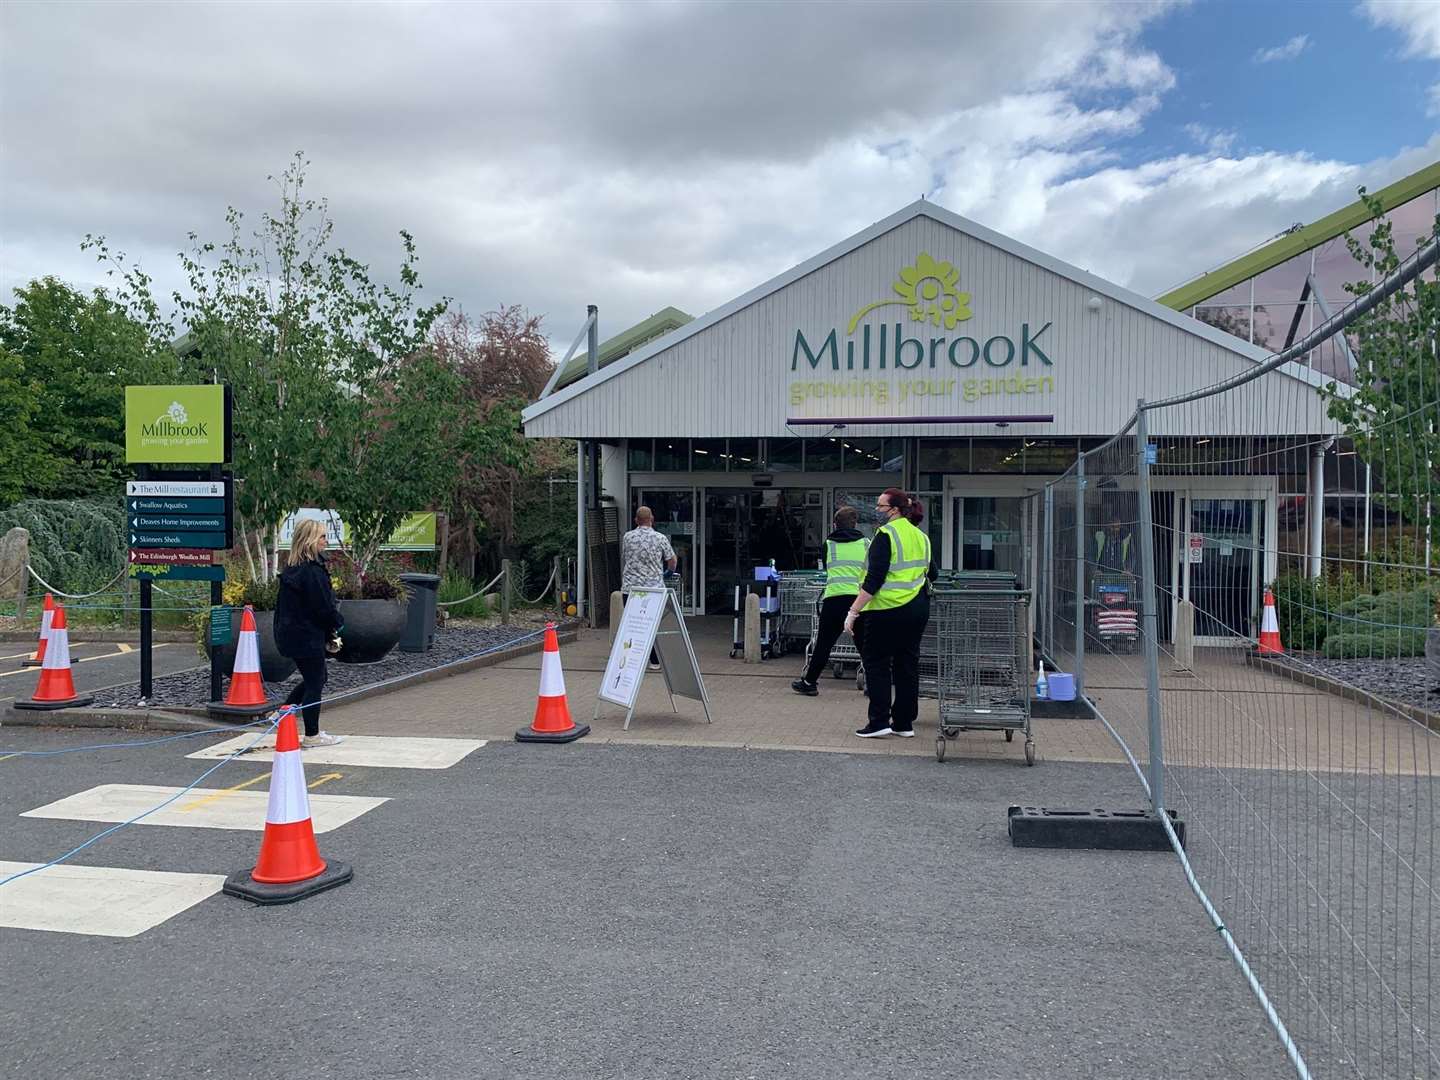 Millbrook Garden Centre has reopened its doors to the public